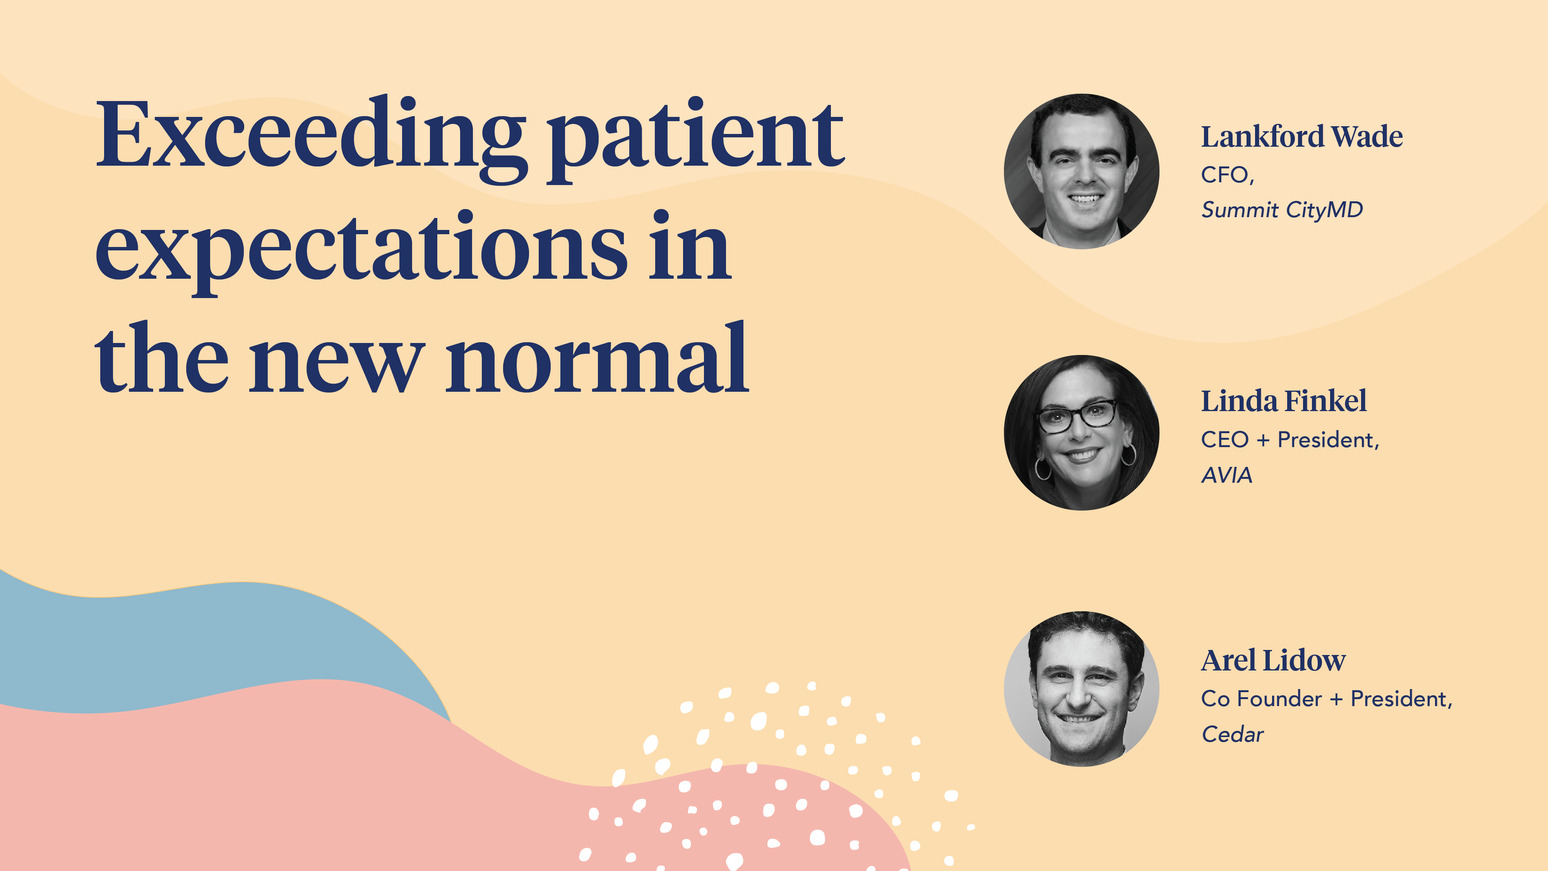 Exceeding patient expectations in the new normal